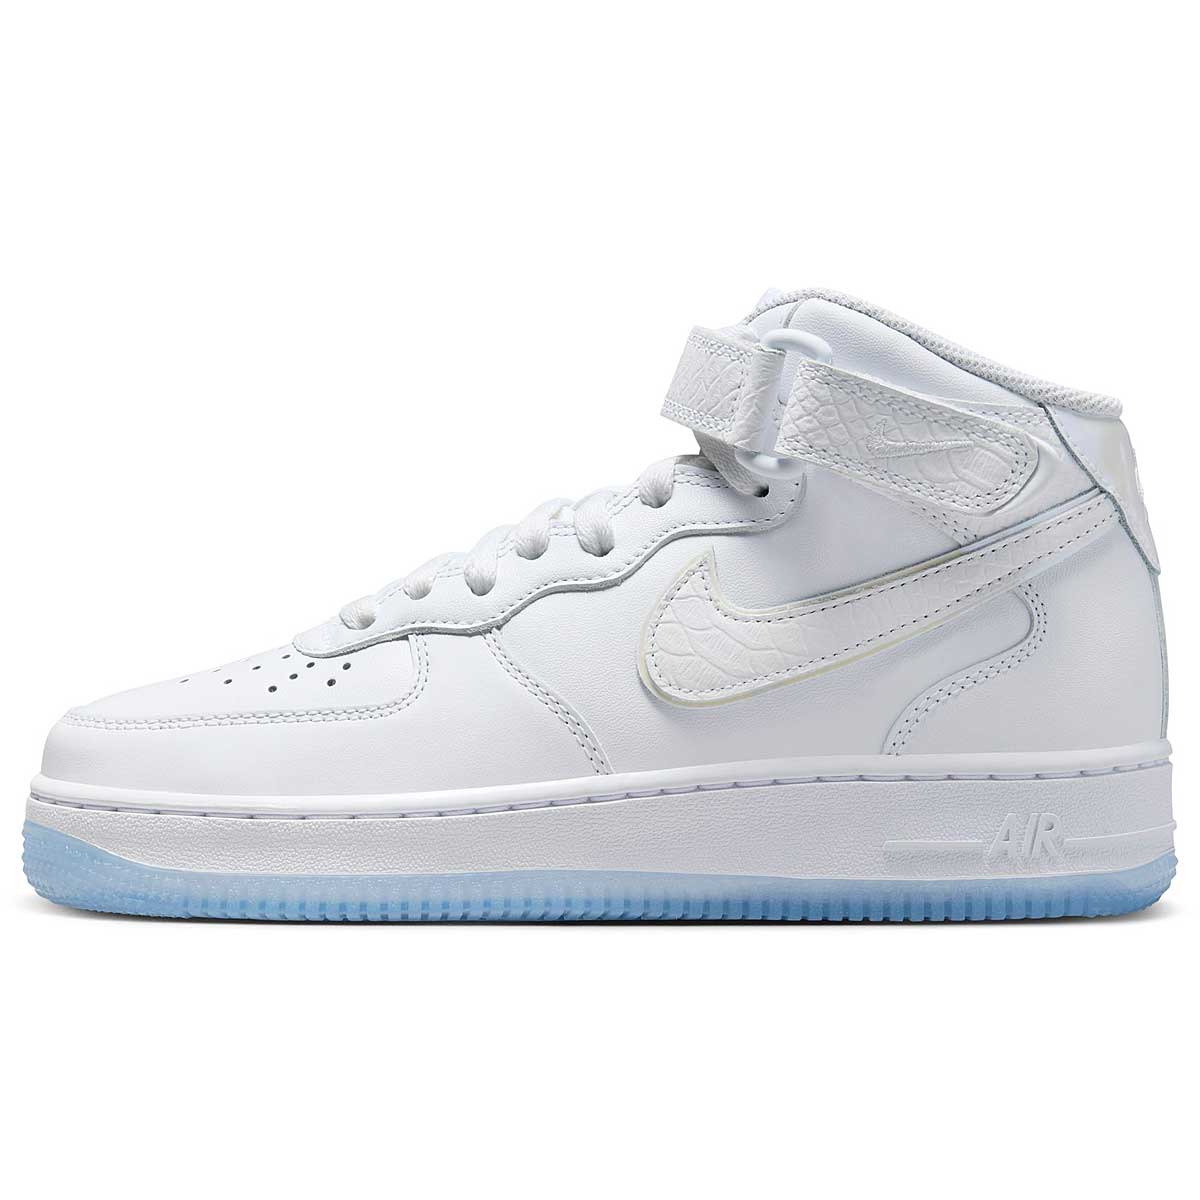 Buy W AIR FORCE 1 MID YEAR OF THE DRAGON for EUR 84.90 on KICKZ.com!